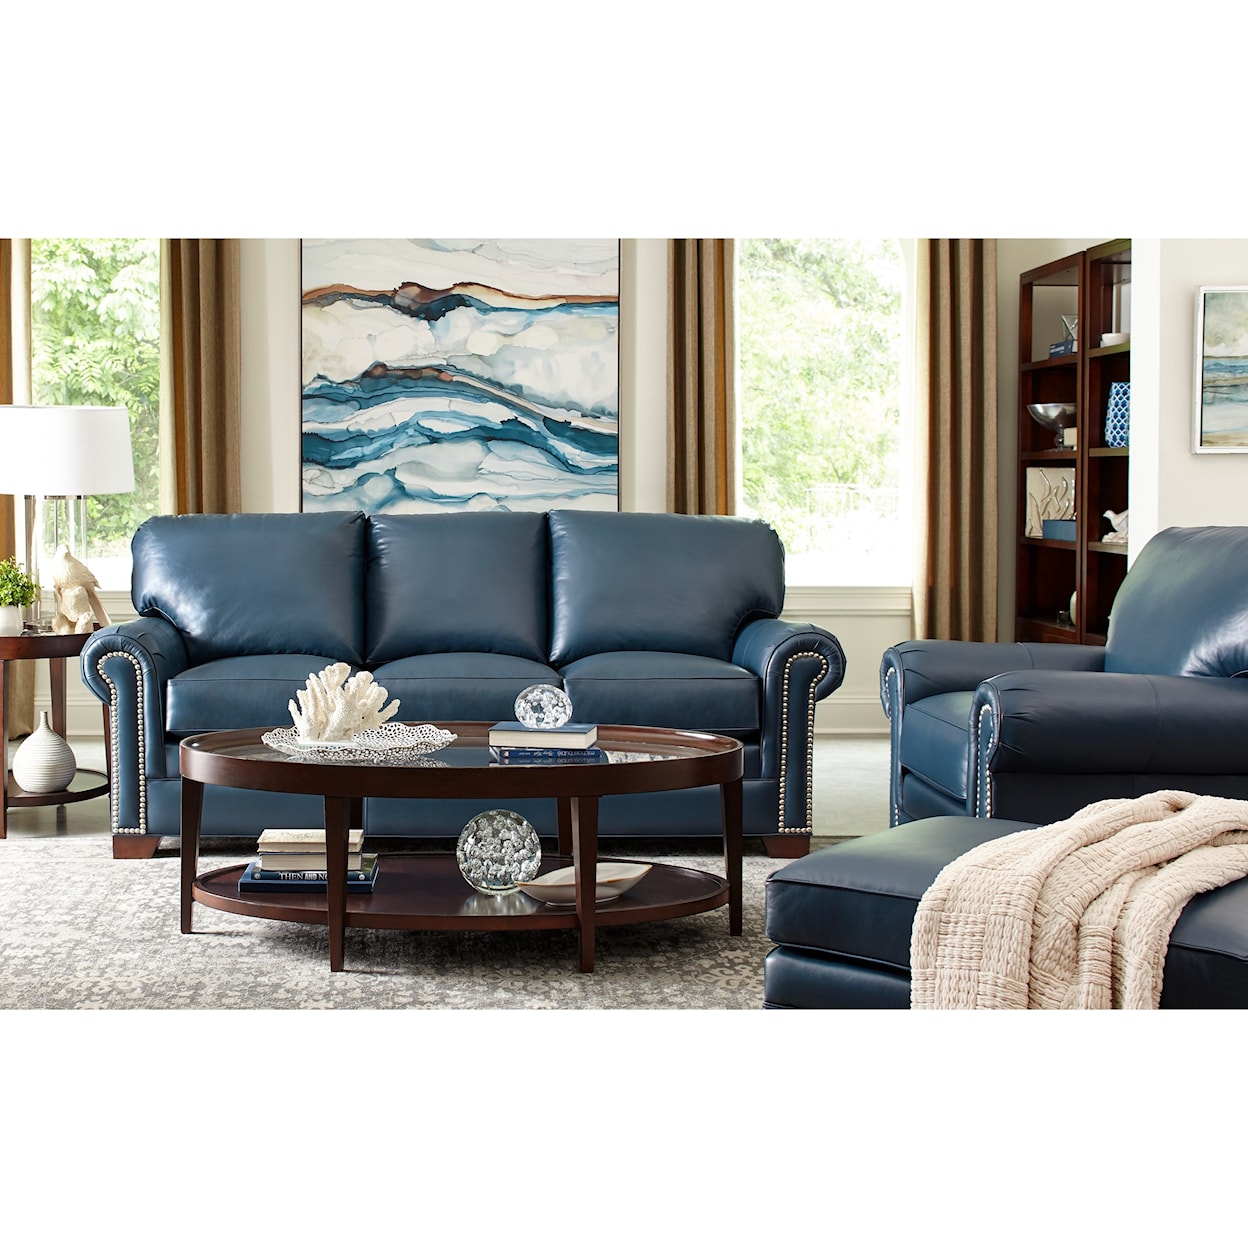 Hickory Craft L756650 Living Room Group